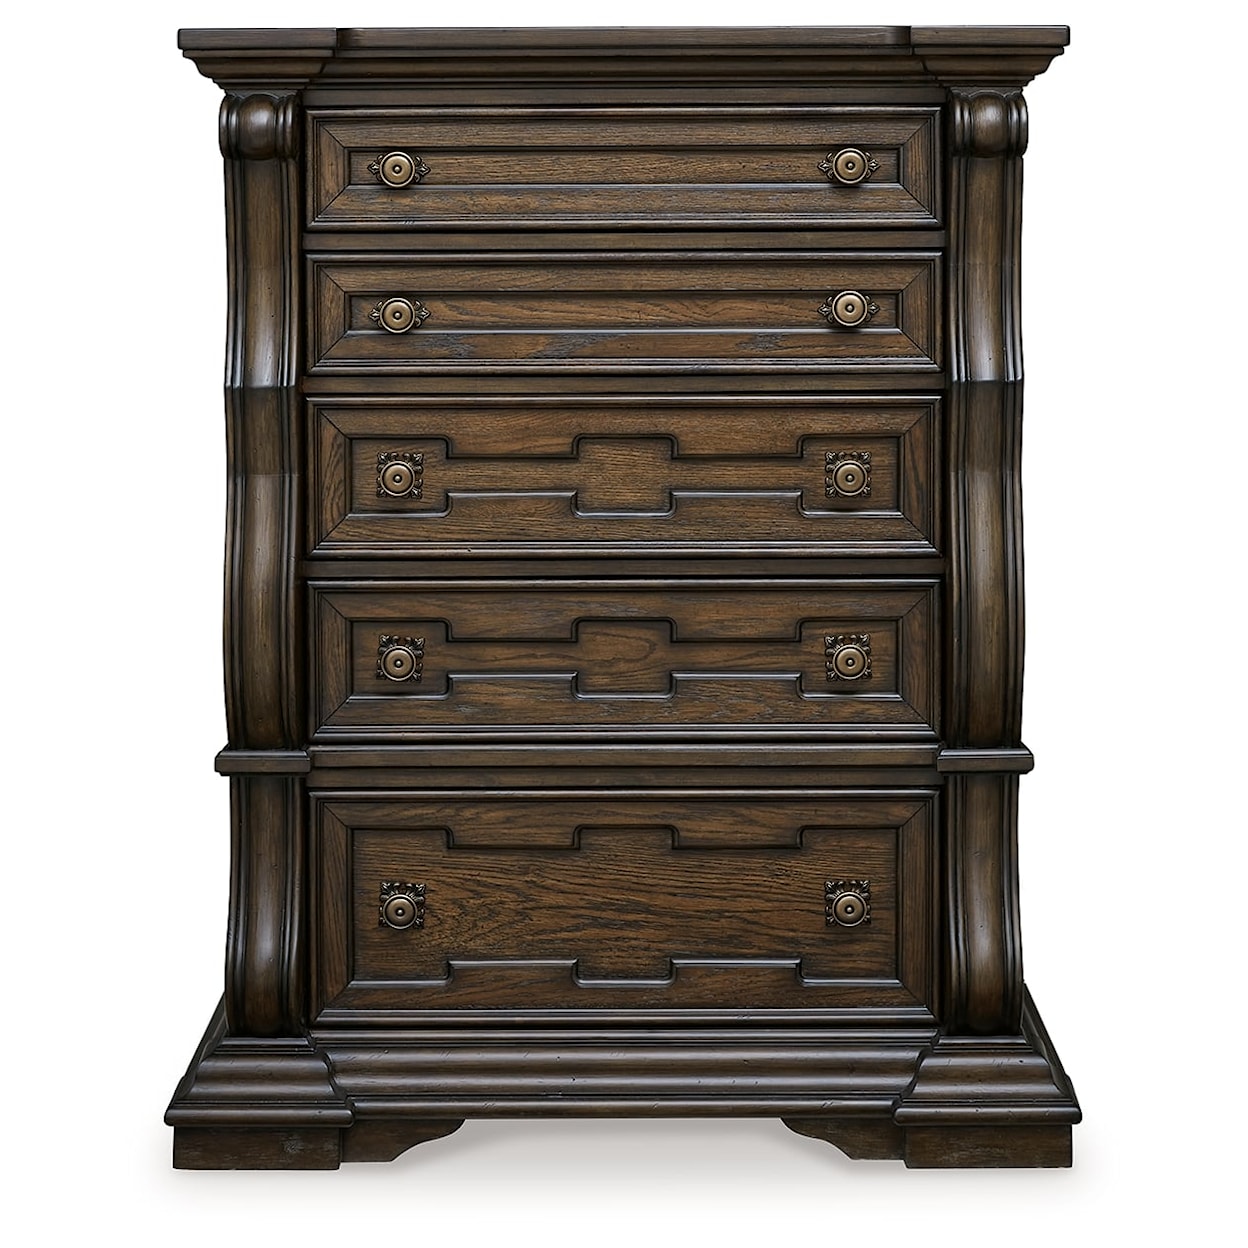 Michael Alan Select Maylee 5-Drawer Bedroom Chest